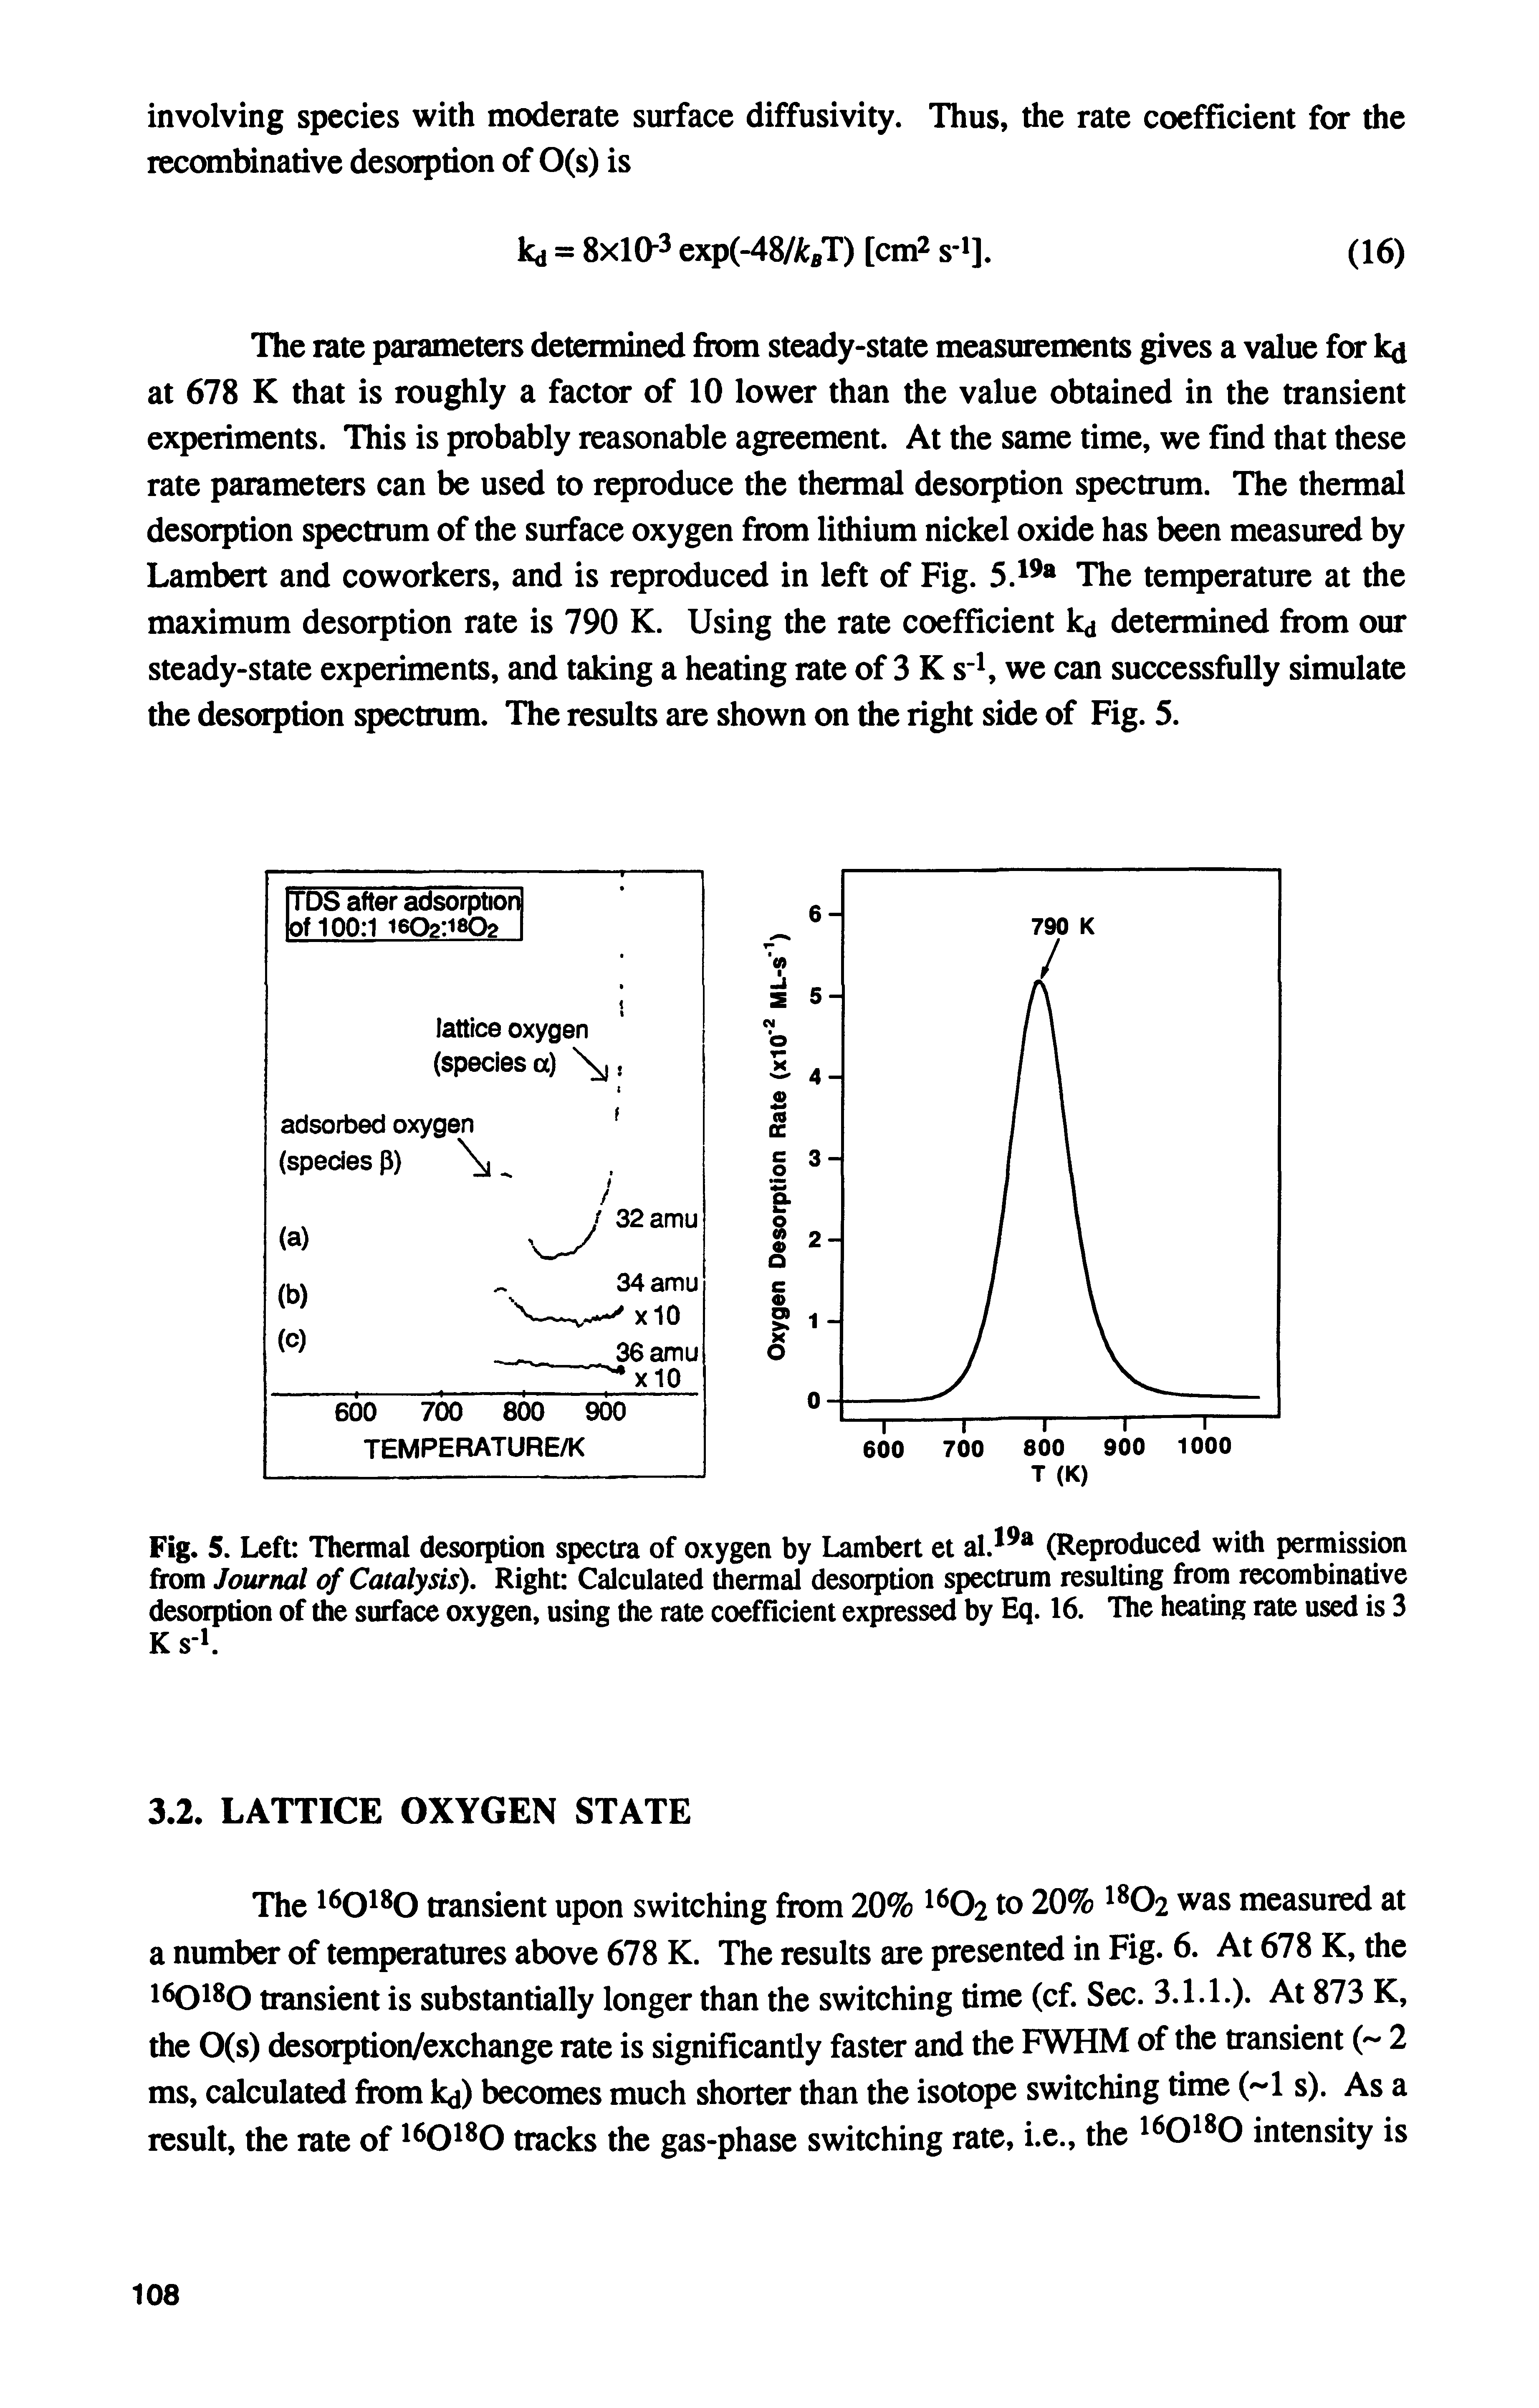 Fig. 5. Left Thermal desorption spectra of oxygen by Lambert et al.l (Reproduced with permission from Journal of Catalysis). Right Calculated thermal desorption spectrum resulting from recombinative desorption of the surface oxygen, using the rate coefficient expressed by Eq. 16. The heating rate used is 3 Ks-i.